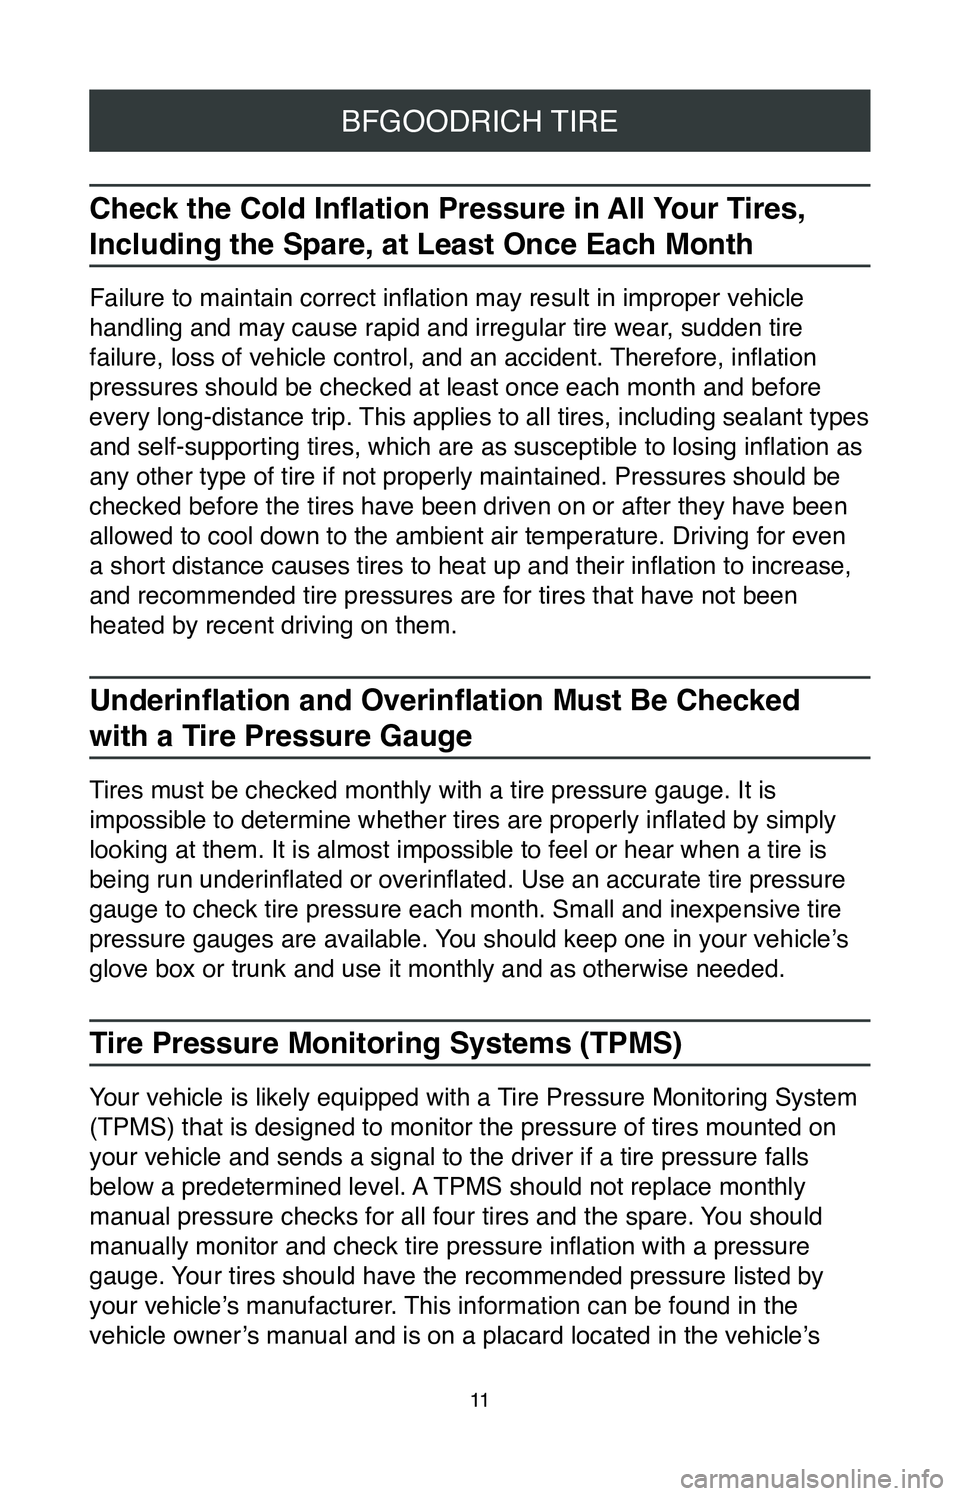 TOYOTA HIGHLANDER 2020  Warranties & Maintenance Guides (in English) 11
BFGOODRICH TIRE
Check the Cold Inflation Pressure in All Your Tires, 
Including the Spare, at Least Once Each Month
Failure to maintain correct inflation may result in improper vehicle 
handling an